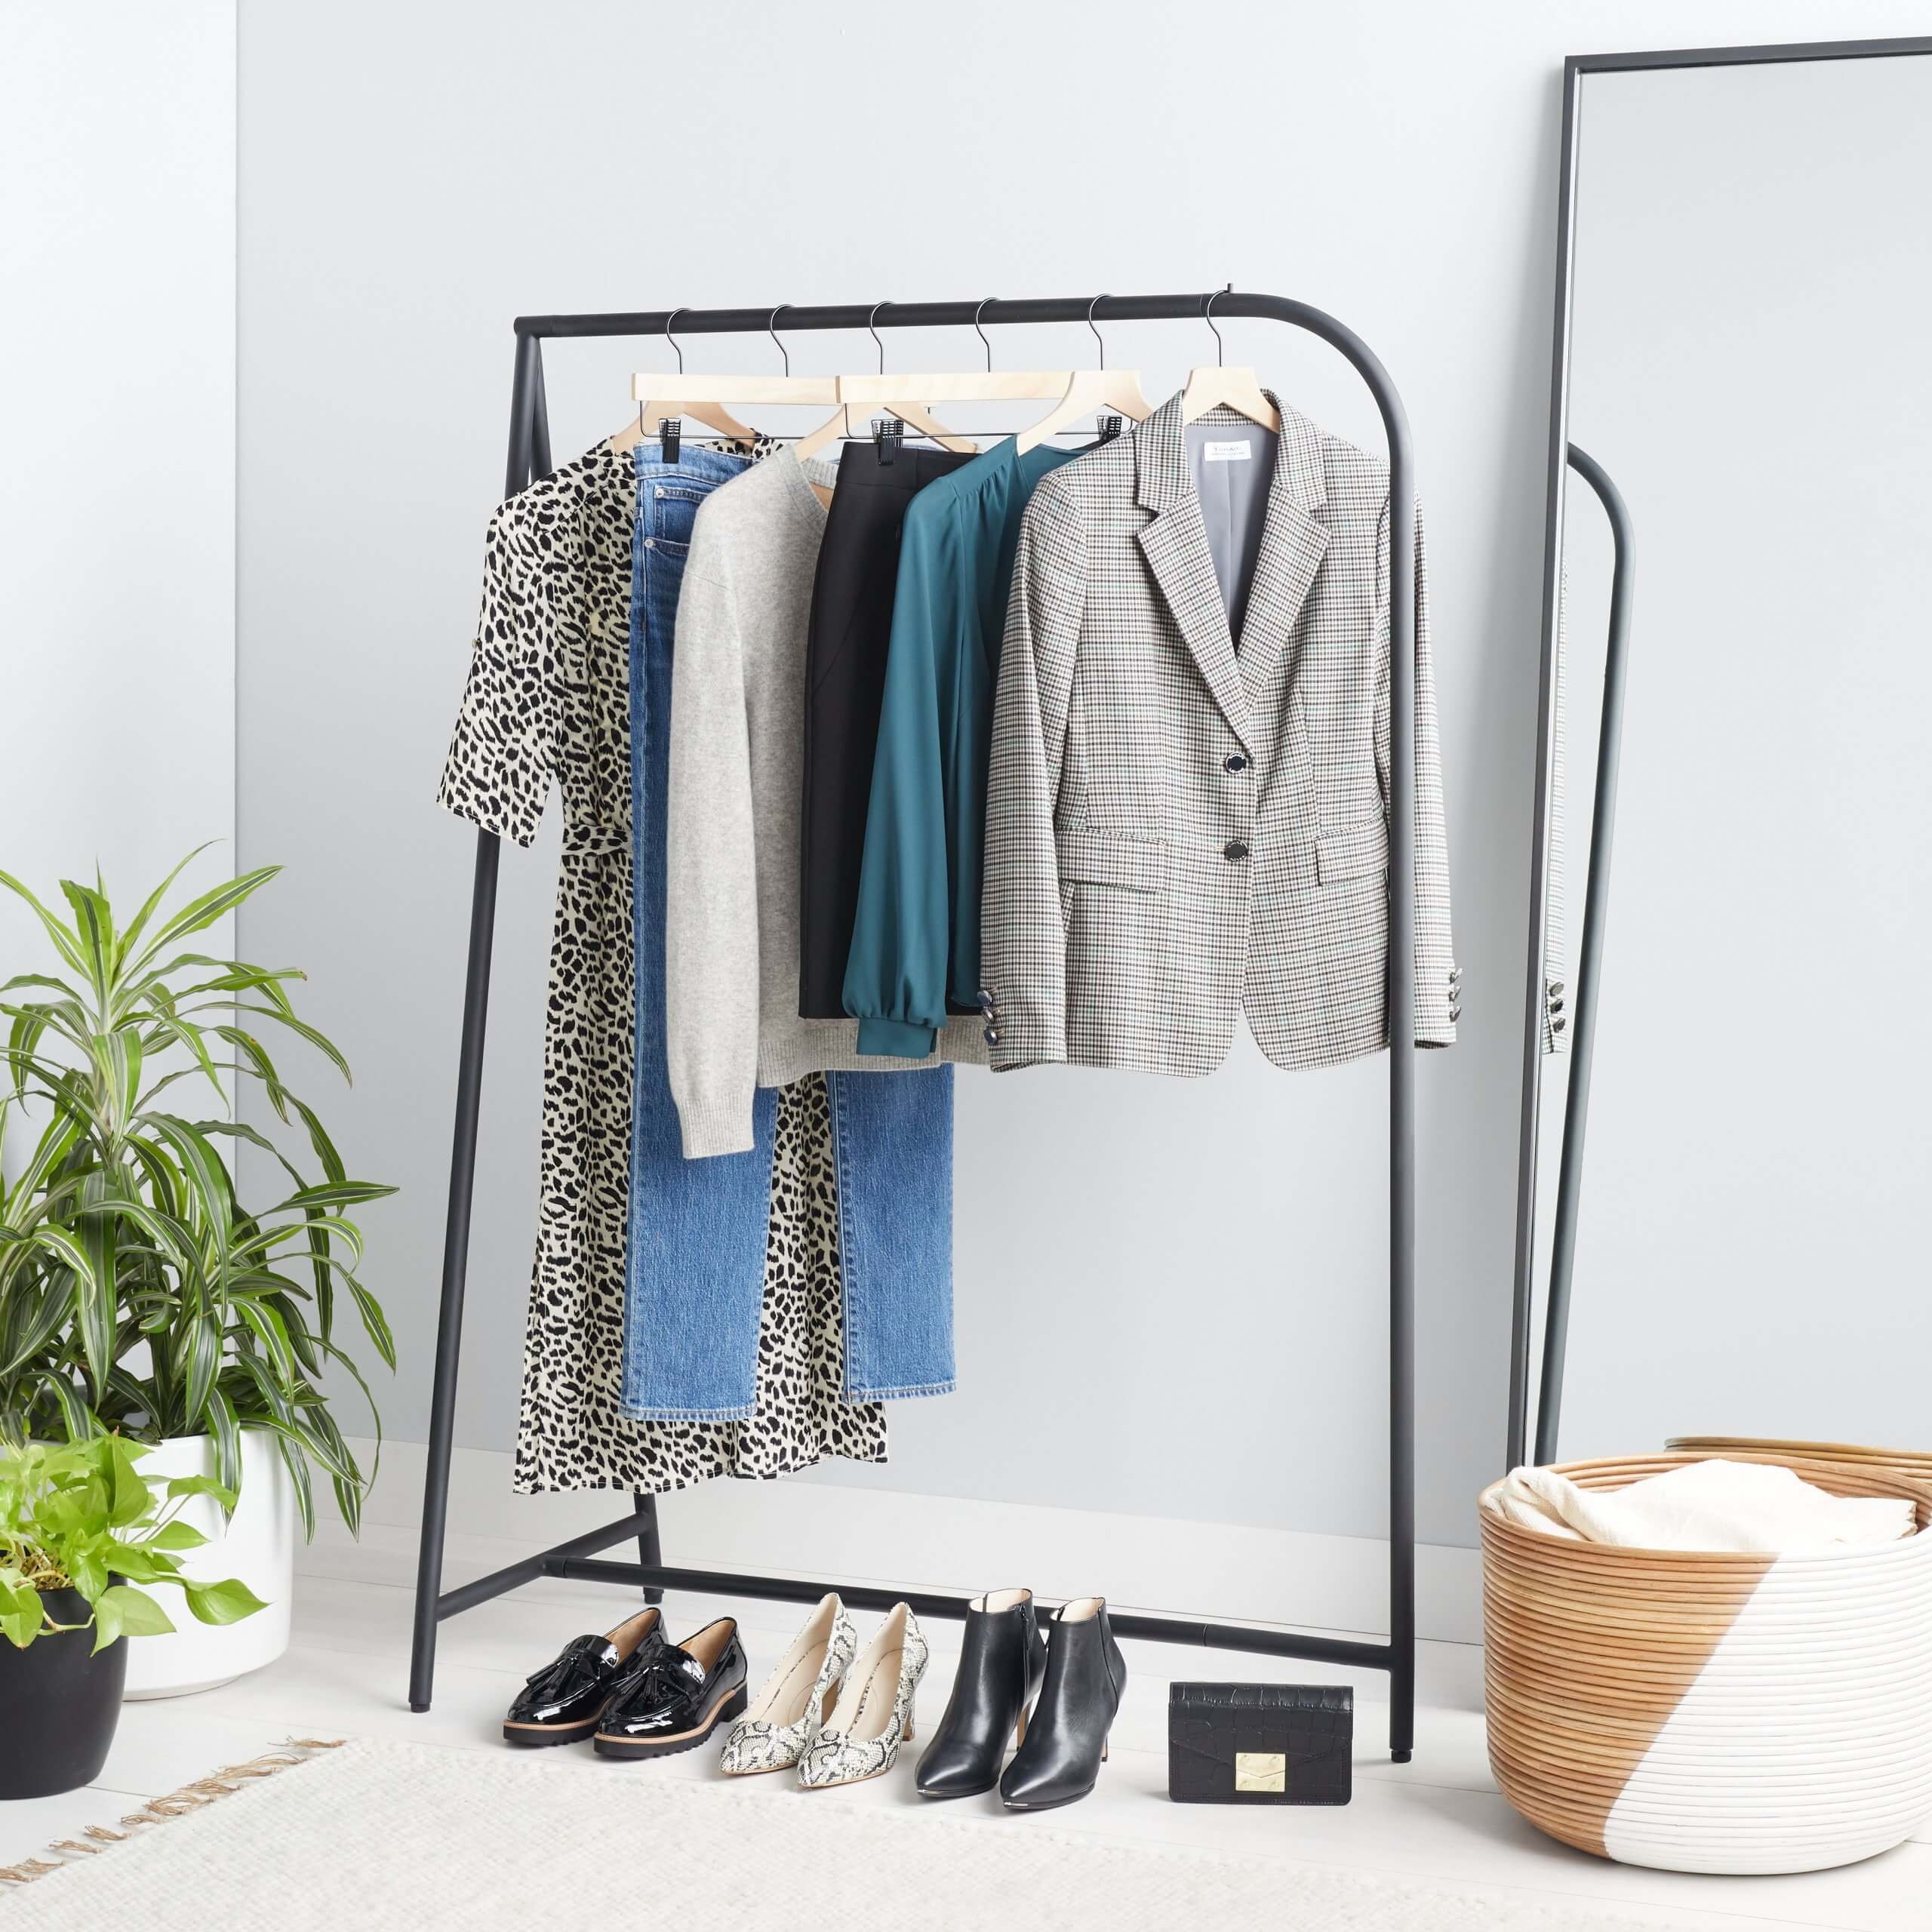 Stitch Fix Women’s rack image featuring grey blazer, teal blouse, black skirt, grey sweater, blue jeans and black animal print tie-waist dress hanging on black rack next to black purse, black booties, white animal print pumps and black loafers on the floor.